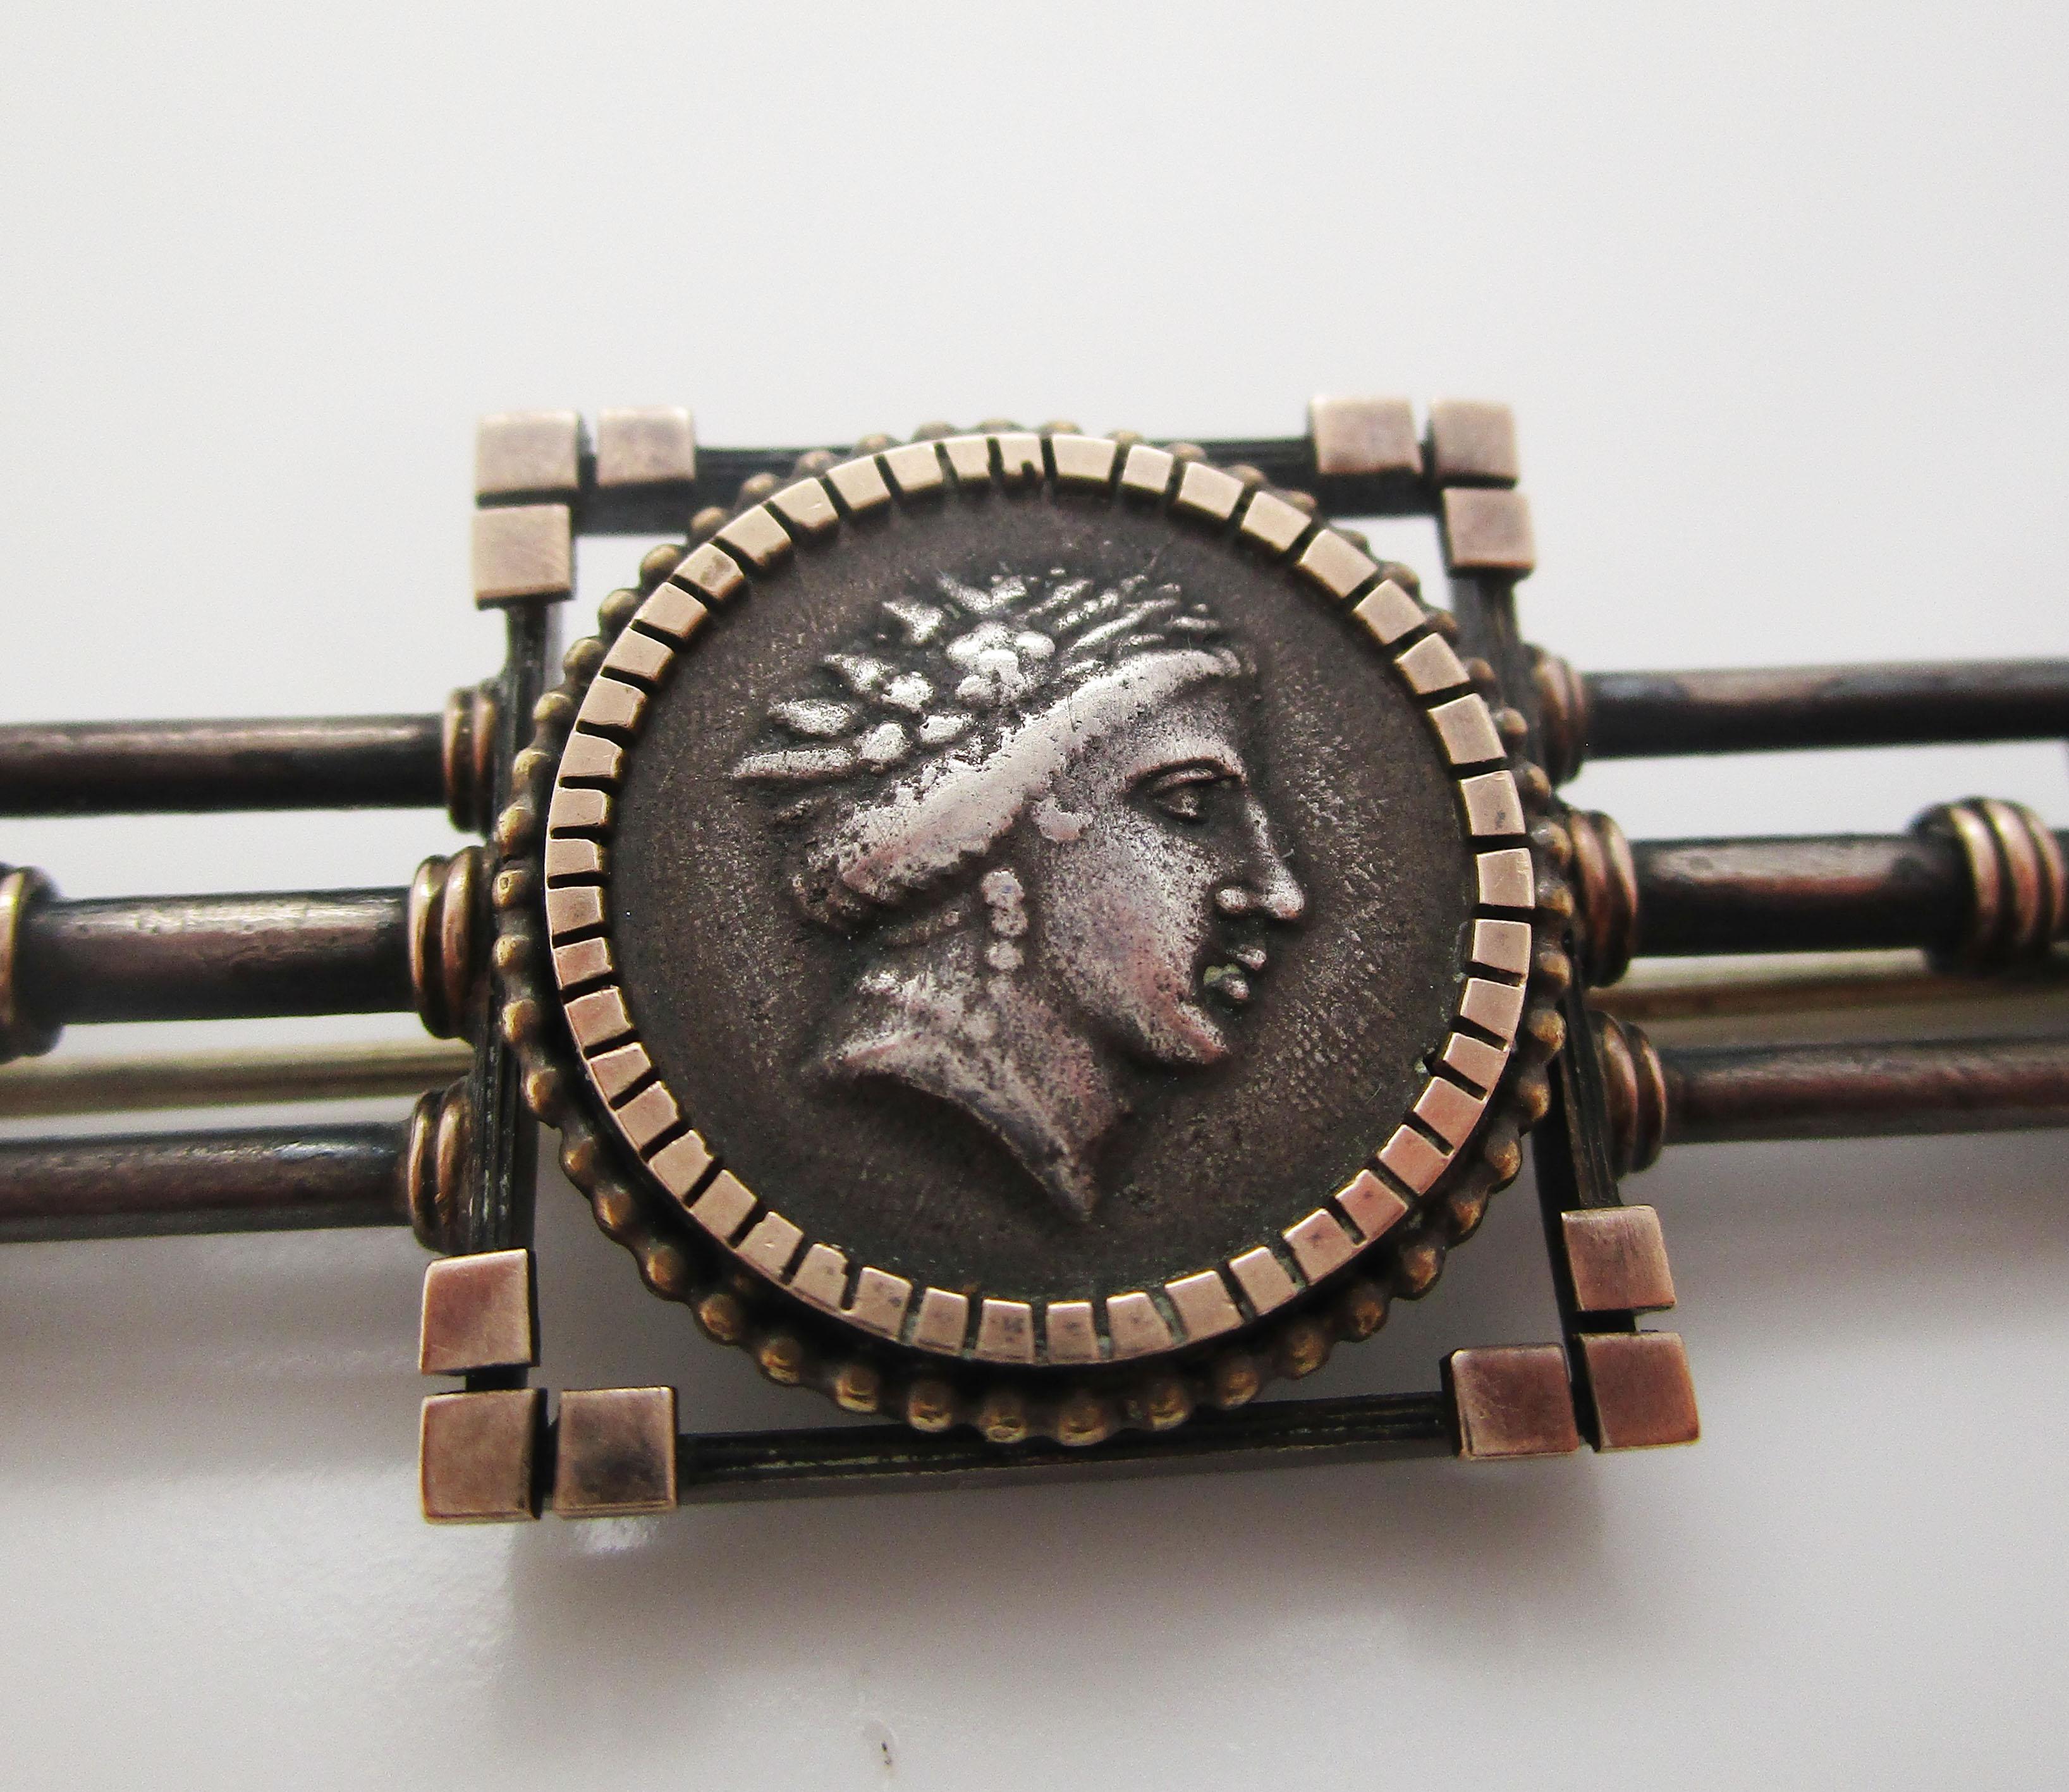 This awesome Victorian pin is in sterling silver and features a Roman-style Homeric medallion at its center, accented by a dramatic bar layout. The medallion at the center bears the Classical style face of a man and is framed by a geometric layout